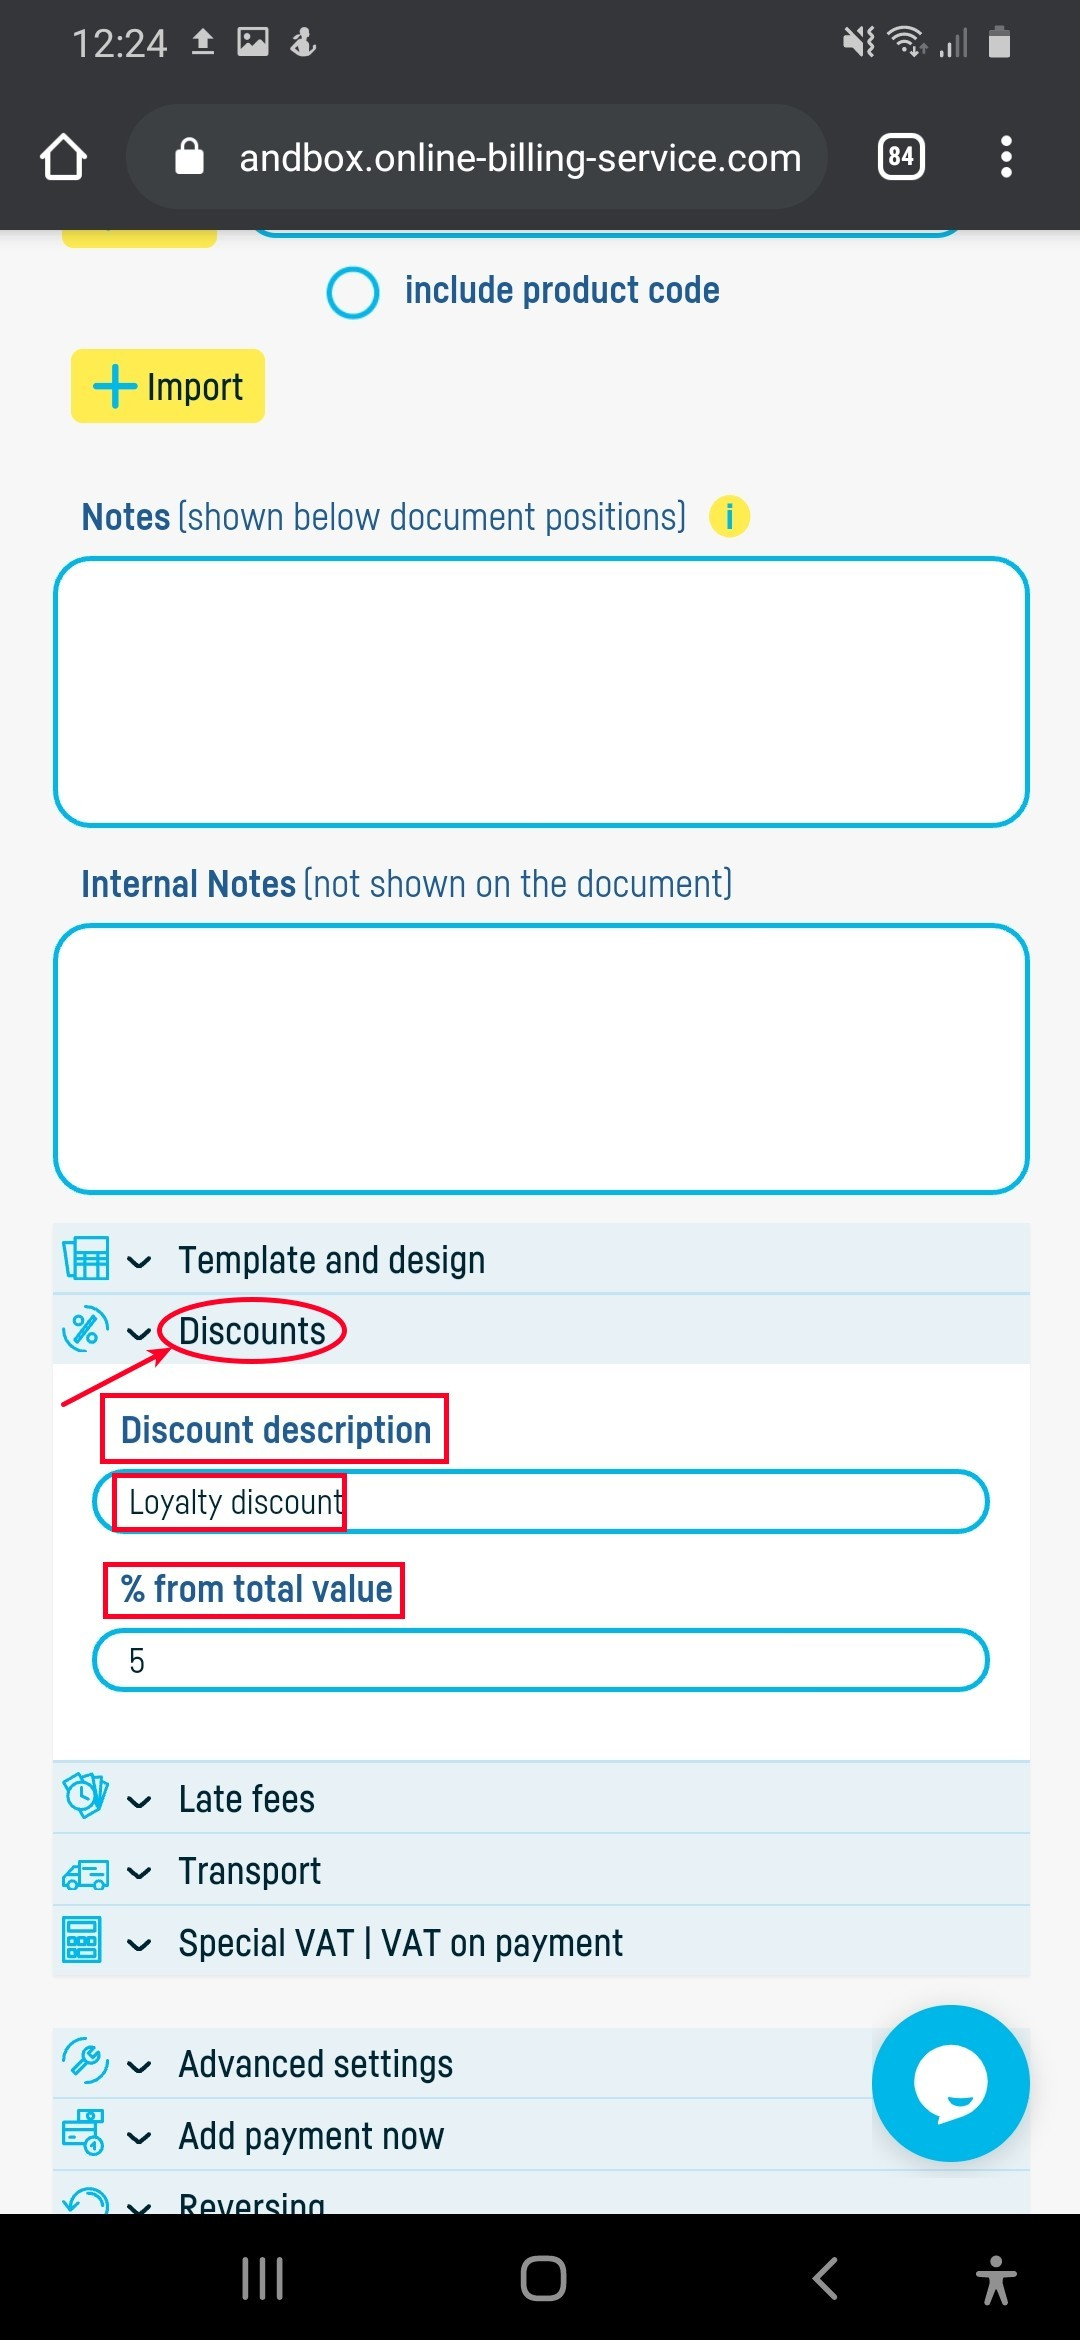 How can I enter discounts on the invoices? - step 1